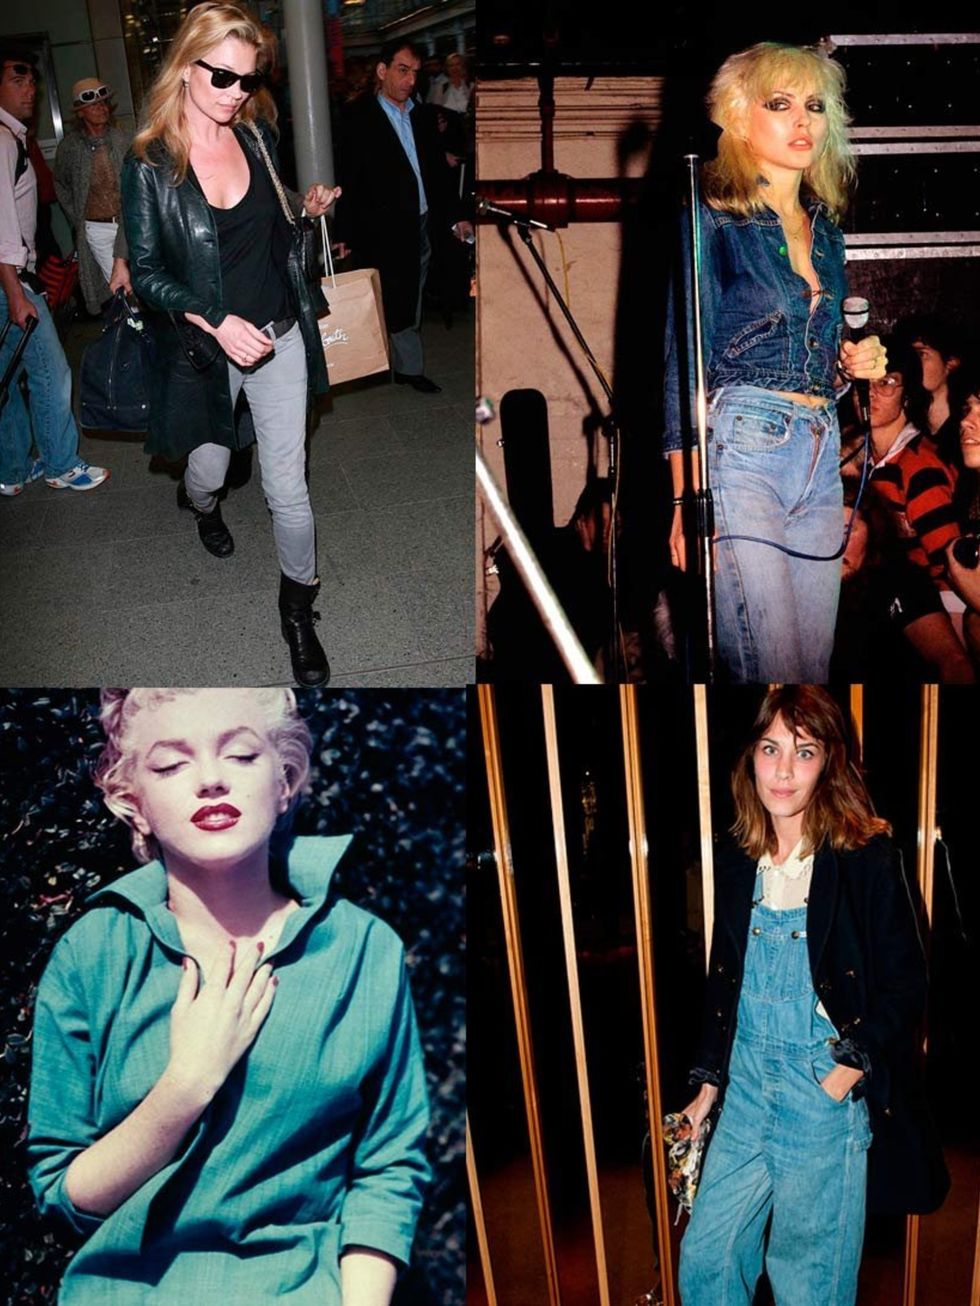 <p>As you may have guessed from our April issue, we love a good bit of <a href="http://www.elleuk.com/fashion/trends/team-elle-tries-out-this-seasons-denim-overalls">denim</a>. And we're not alone - for decades some of our favourite celebrities have been 